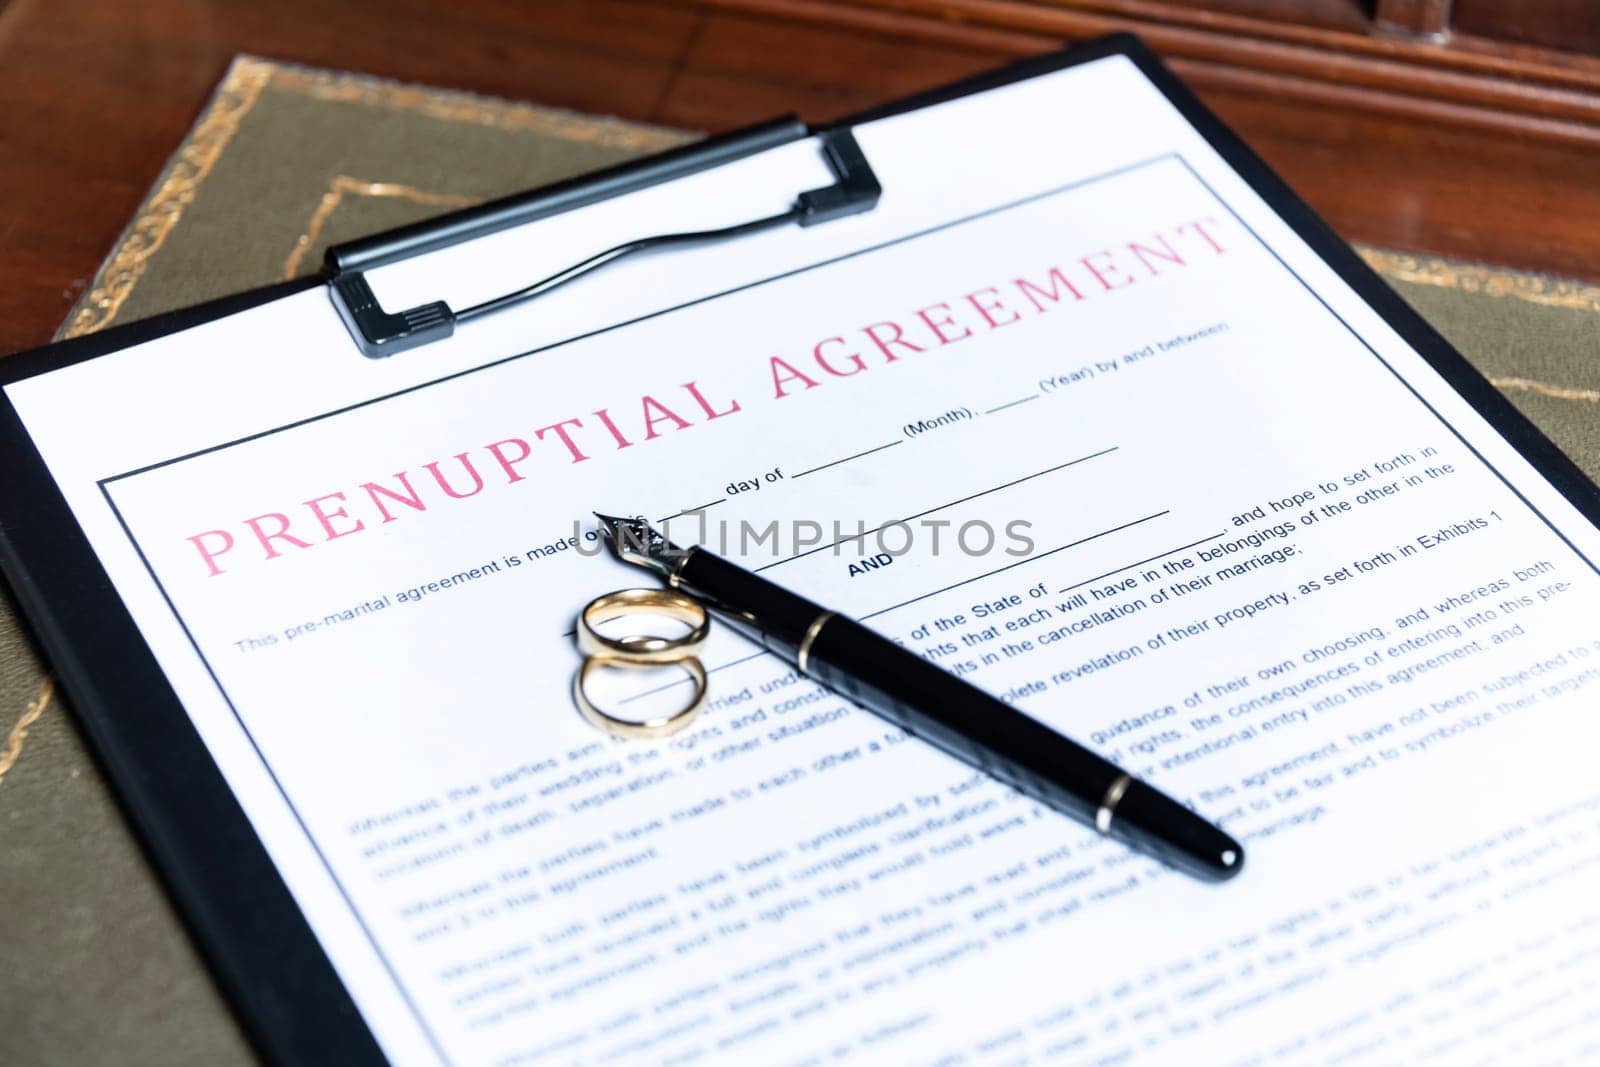 Close-up of a prenuptial agreement form with wedding rings and a fountain pen, indicating the legal aspects of marriage preparation